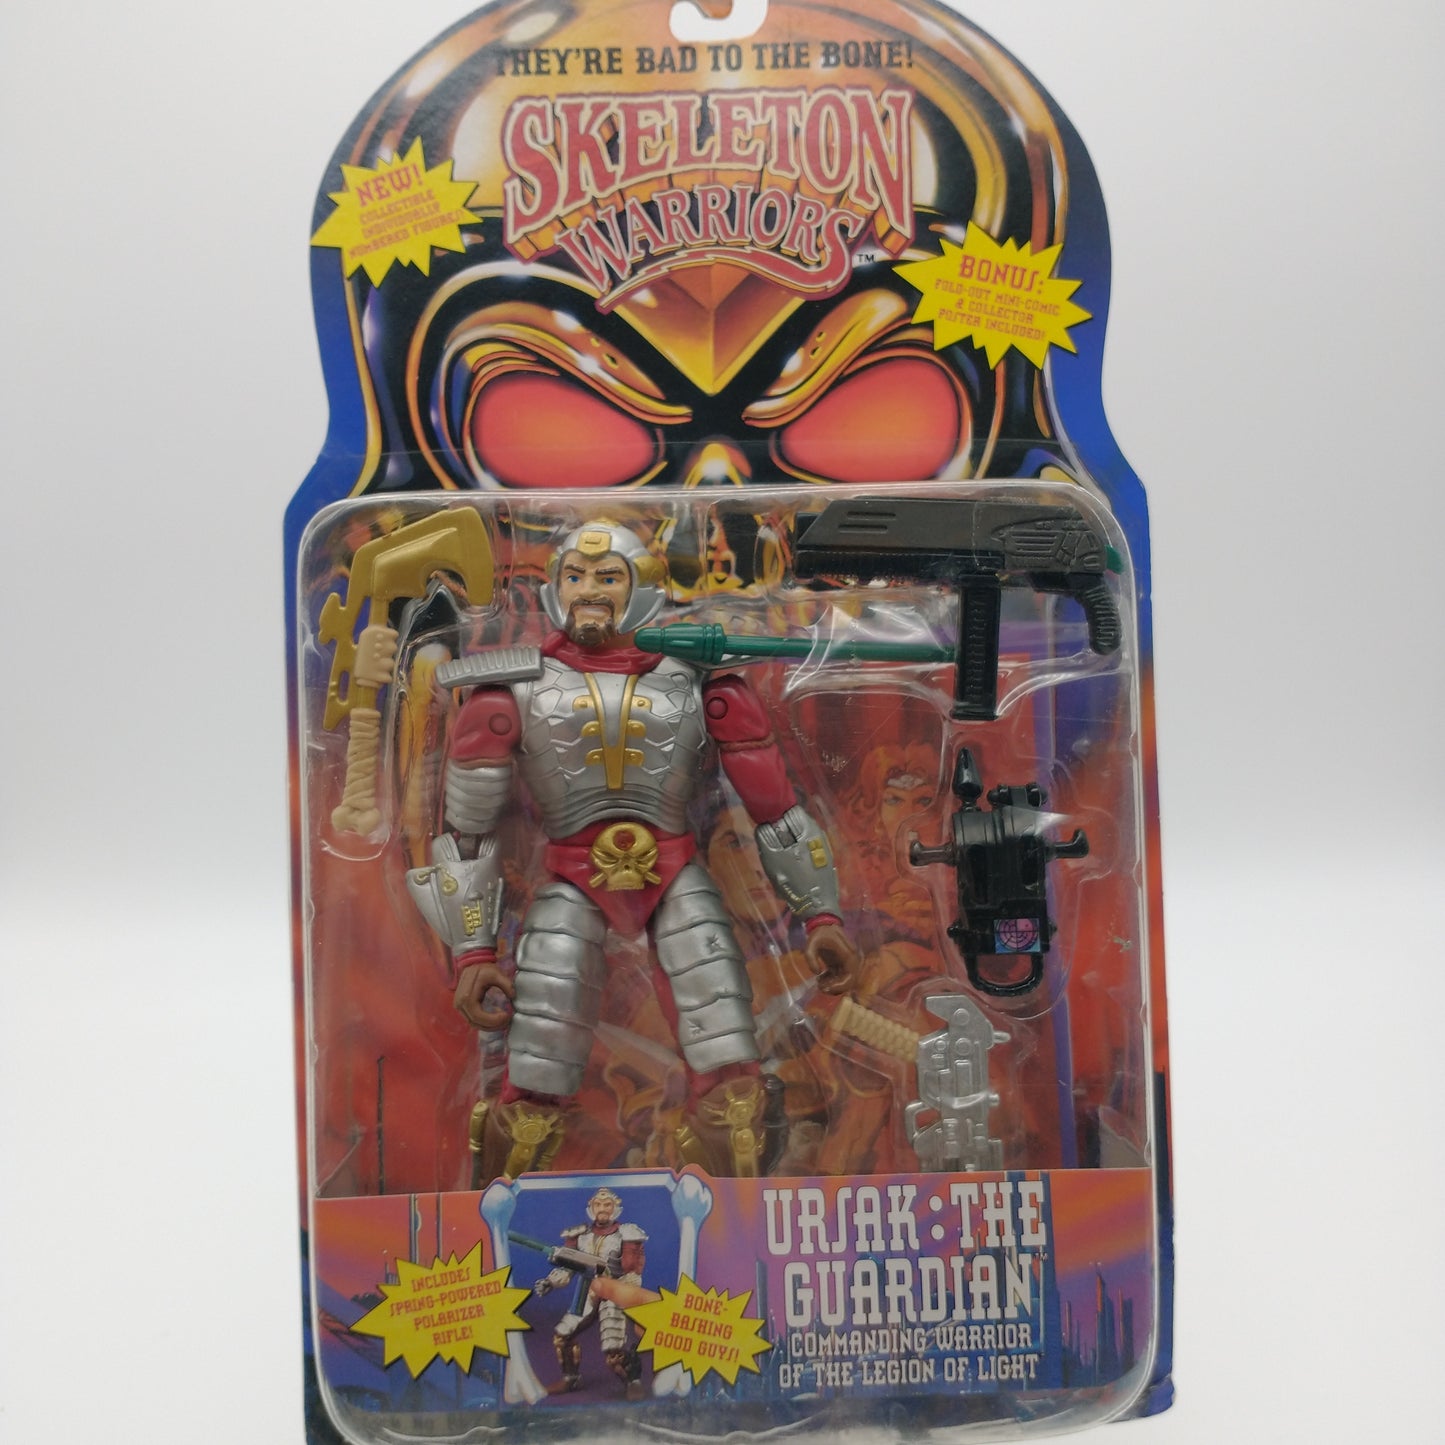 The front of the cart and bubble. The bubble is sealed and the action figure of ursak is inside along with various weapons.